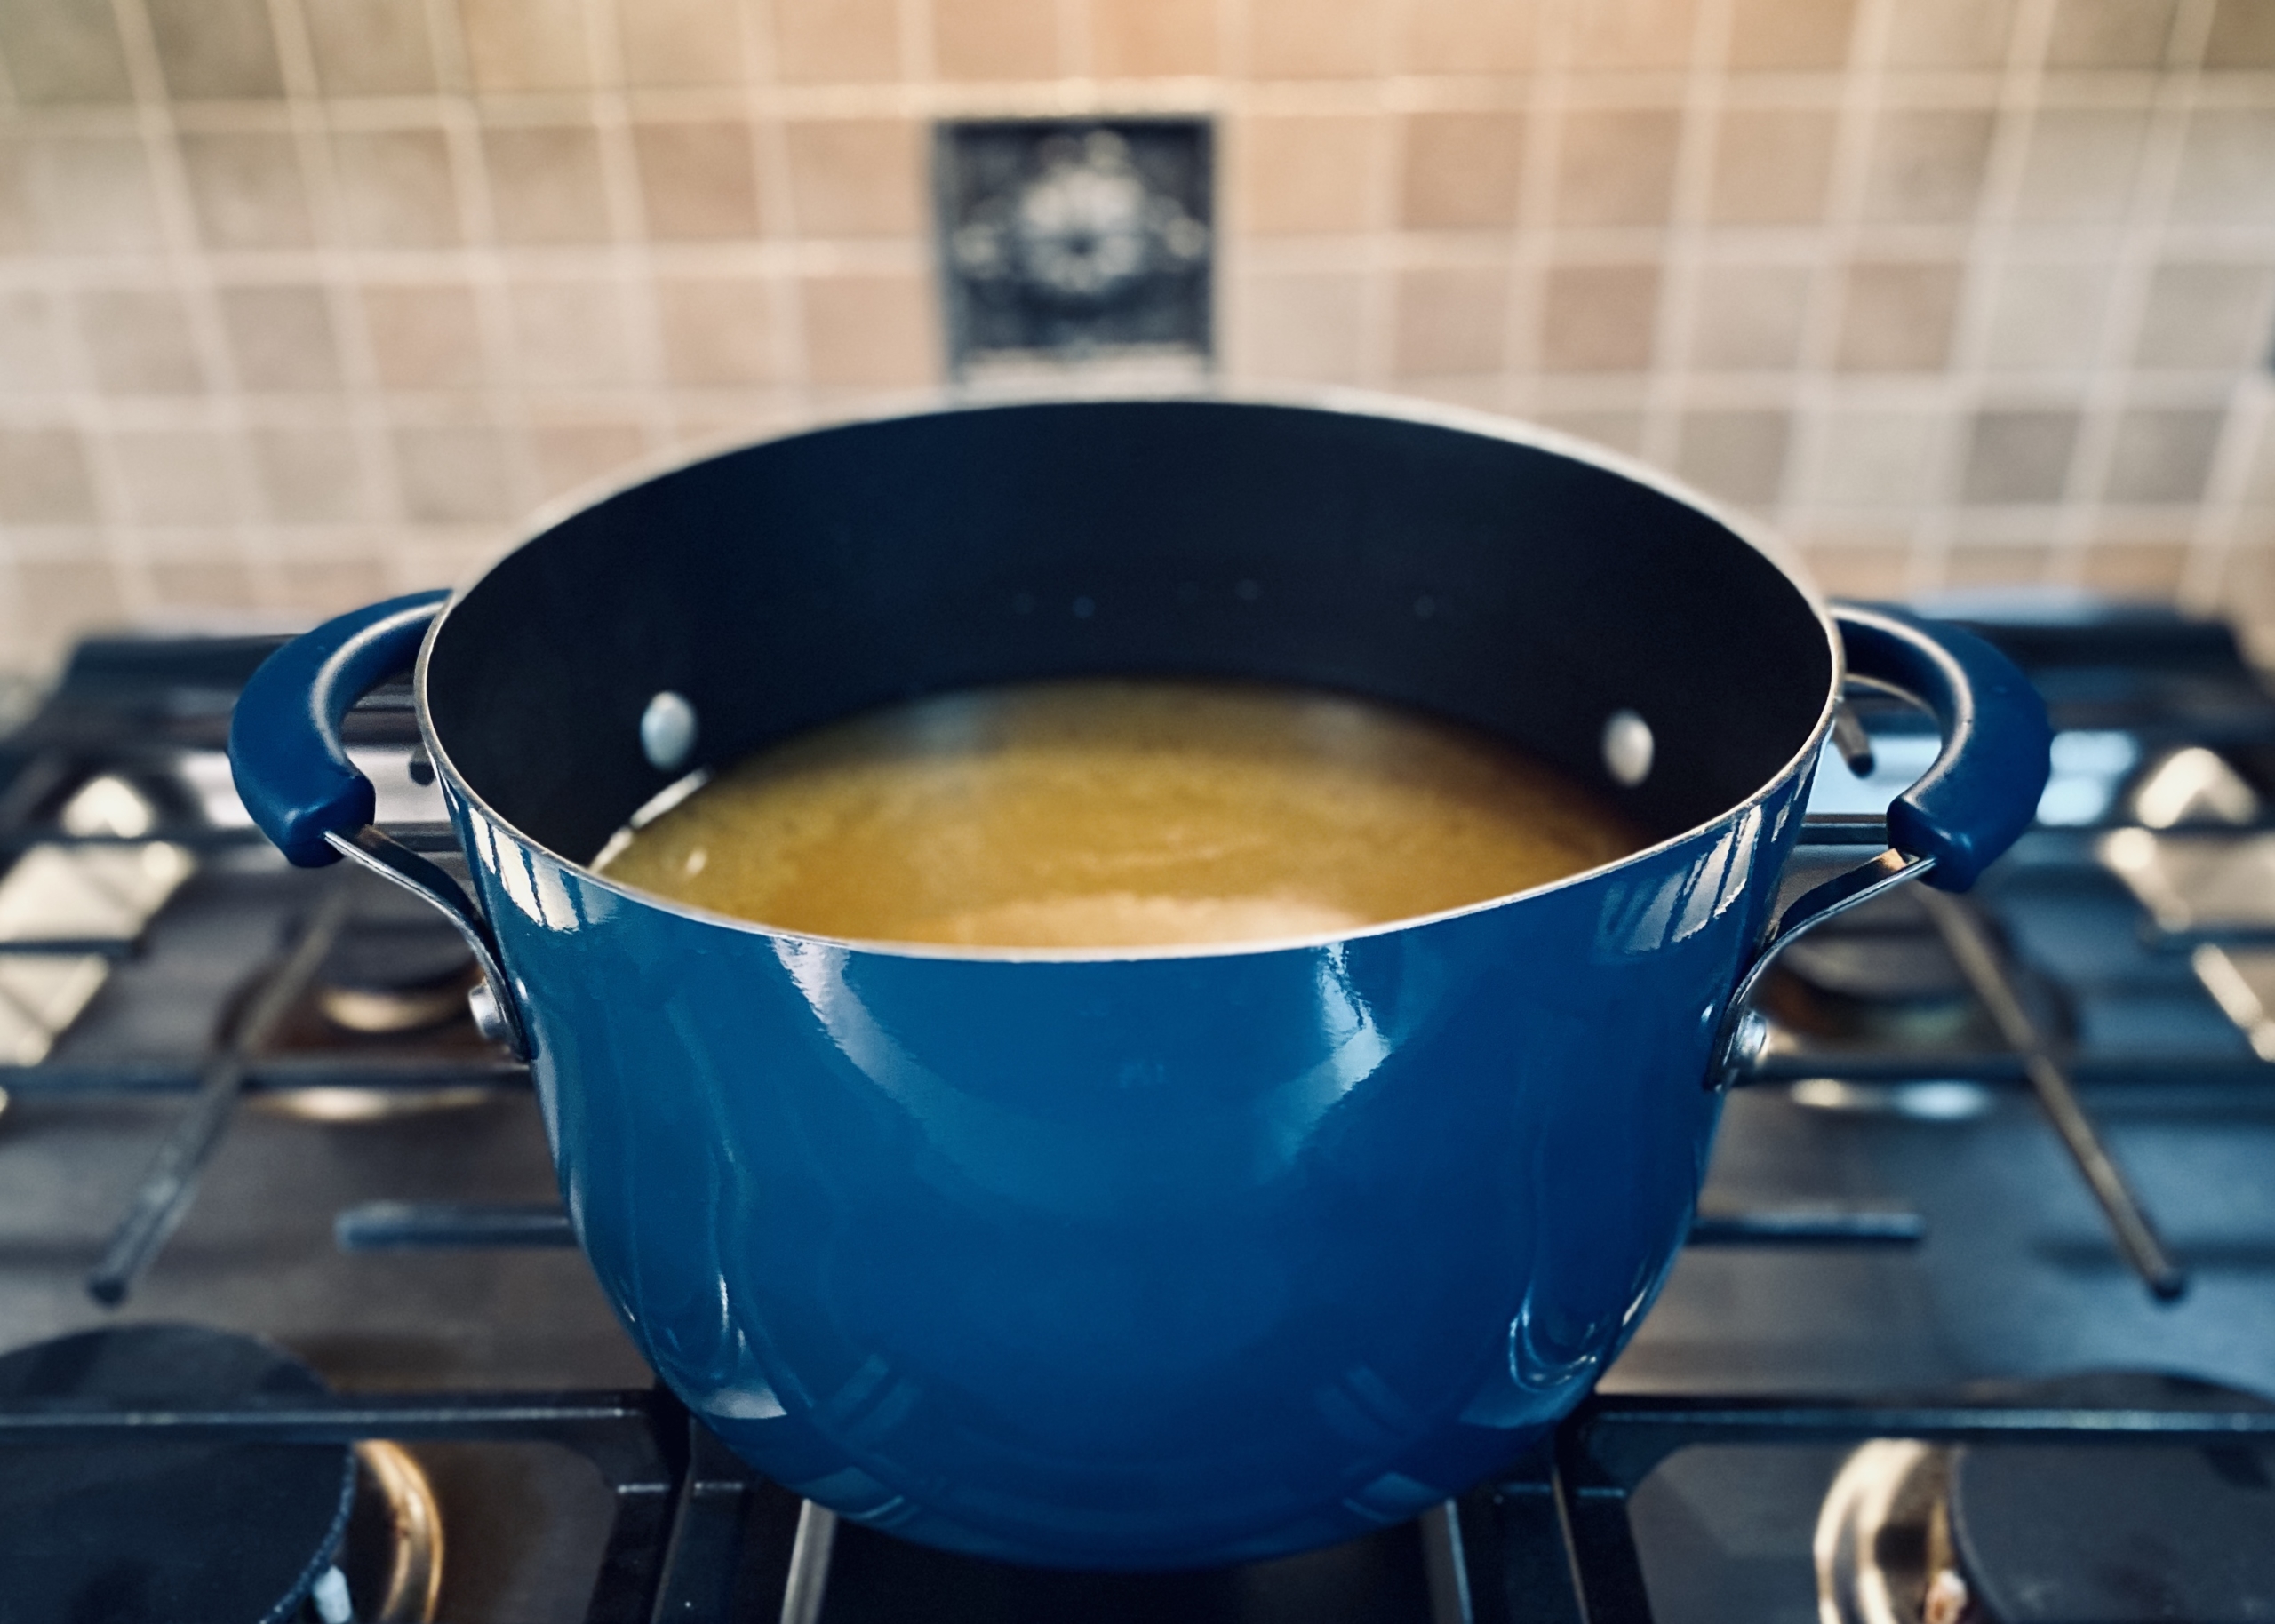 Foods to eat when sick: Broth simmering on stove